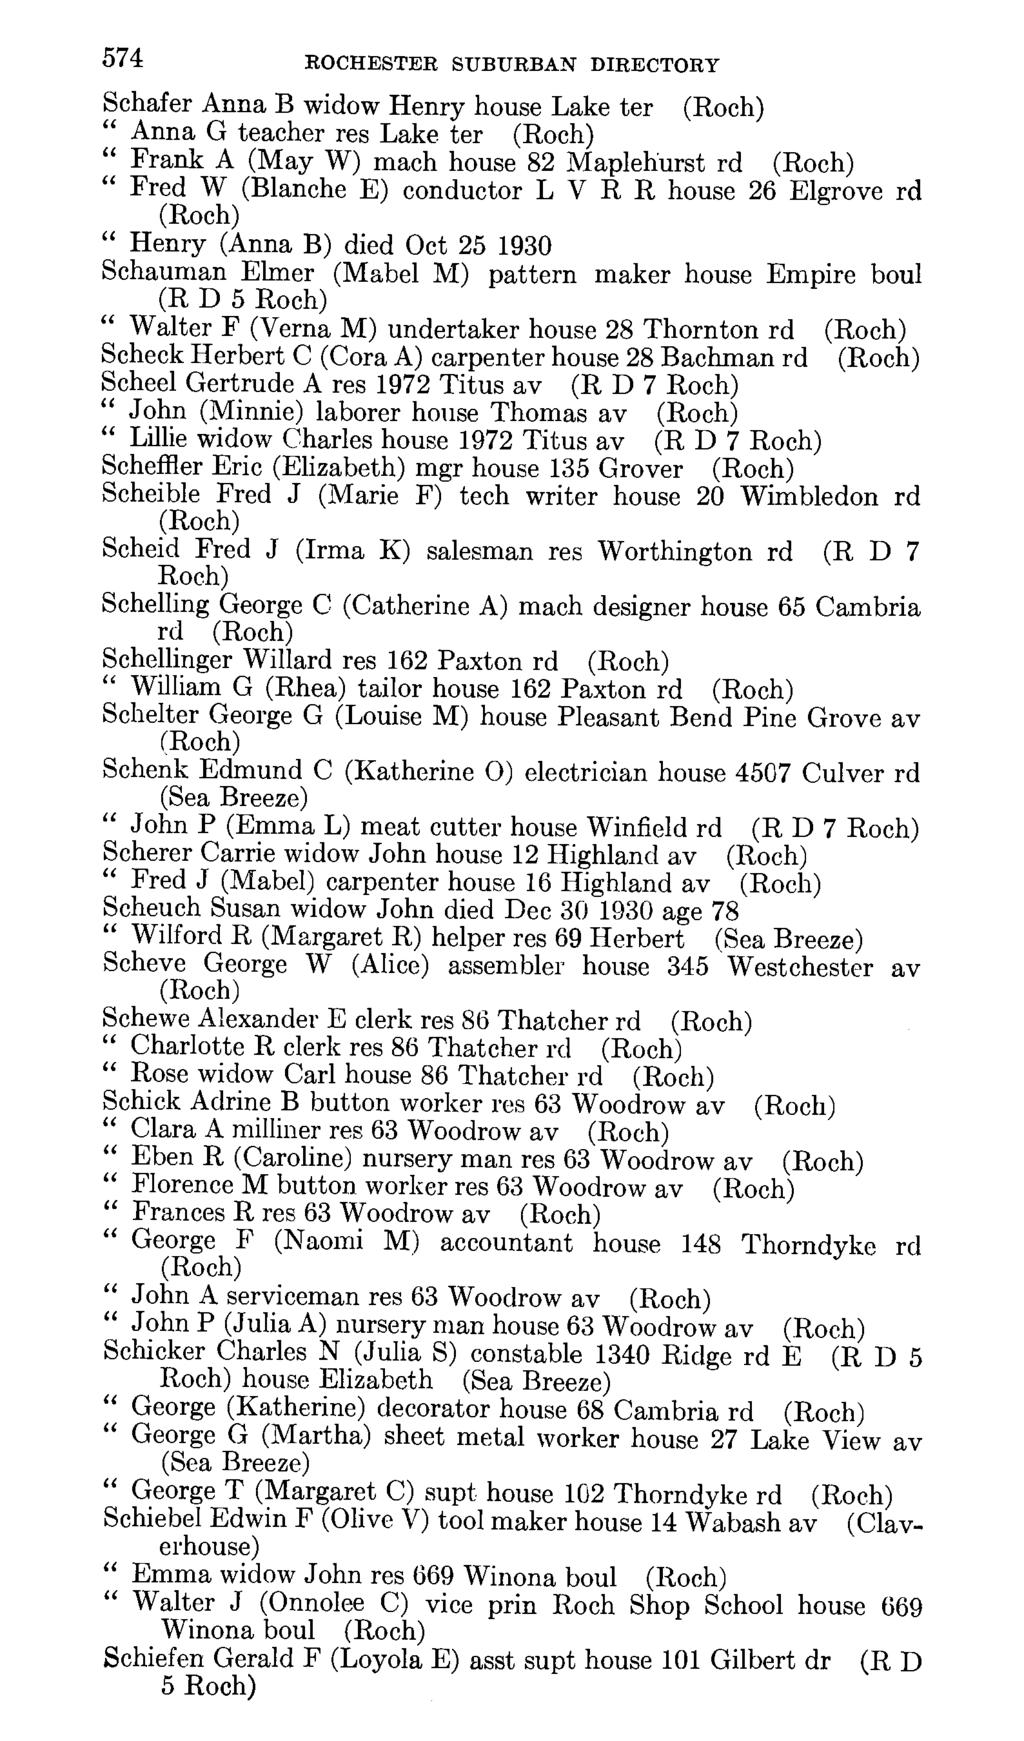 574 ROCHESTER SUBURBAN DIRECTORY Schafer Anna B widow Henry house Lake ter Anna G teacher res Lake ter Frank A (May W) mach house 82 Maplehurst rd Fred W (Blanche E) conductor L V R R house 26